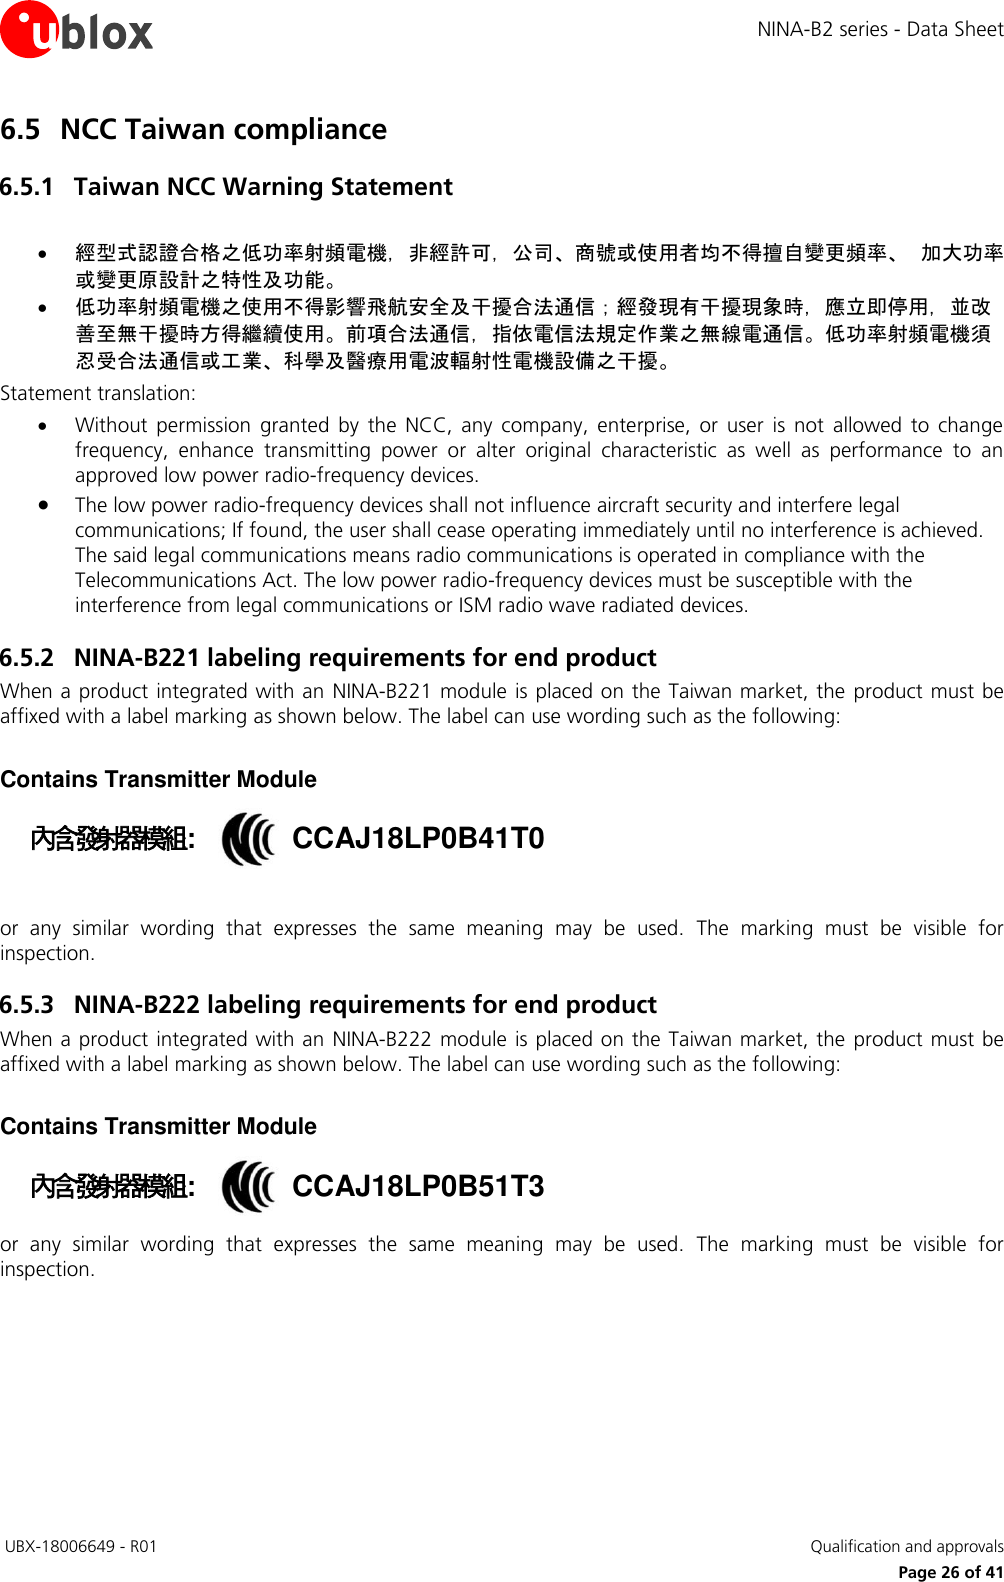 NINA-B2 series - Data Sheet  UBX-18006649 - R01   Qualification and approvals     Page 26 of 41 6.5 NCC Taiwan compliance 6.5.1 Taiwan NCC Warning Statement   經型式認證合格之低功率射頻電機，非經許可，公司、商號或使用者均不得擅自變更頻率、 加大功率或變更原設計之特性及功能。  低功率射頻電機之使用不得影響飛航安全及干擾合法通信；經發現有干擾現象時，應立即停用，並改善至無干擾時方得繼續使用。前項合法通信，指依電信法規定作業之無線電通信。低功率射頻電機須忍受合法通信或工業、科學及醫療用電波輻射性電機設備之干擾。 Statement translation:    Without  permission  granted  by  the  NCC,  any  company,  enterprise,  or  user  is  not  allowed  to  change frequency,  enhance  transmitting  power  or  alter  original  characteristic  as  well  as  performance  to  an approved low power radio-frequency devices.  The low power radio-frequency devices shall not influence aircraft security and interfere legal communications; If found, the user shall cease operating immediately until no interference is achieved. The said legal communications means radio communications is operated in compliance with the Telecommunications Act. The low power radio-frequency devices must be susceptible with the interference from legal communications or ISM radio wave radiated devices. 6.5.2 NINA-B221 labeling requirements for end product When a product  integrated with an NINA-B221 module is placed on the Taiwan market, the  product must be affixed with a label marking as shown below. The label can use wording such as the following:   Contains Transmitter Module 內含發射器模組::  CCAJ18LP0B41T0  or  any  similar  wording  that  expresses  the  same  meaning  may  be  used.  The  marking  must  be  visible  for inspection. 6.5.3 NINA-B222 labeling requirements for end product When a product  integrated with an NINA-B222 module is placed on the Taiwan market, the  product must be affixed with a label marking as shown below. The label can use wording such as the following:   Contains Transmitter Module 內含發射器模組::  CCAJ18LP0B51T3 or  any  similar  wording  that  expresses  the  same  meaning  may  be  used.  The  marking  must  be  visible  for inspection.   